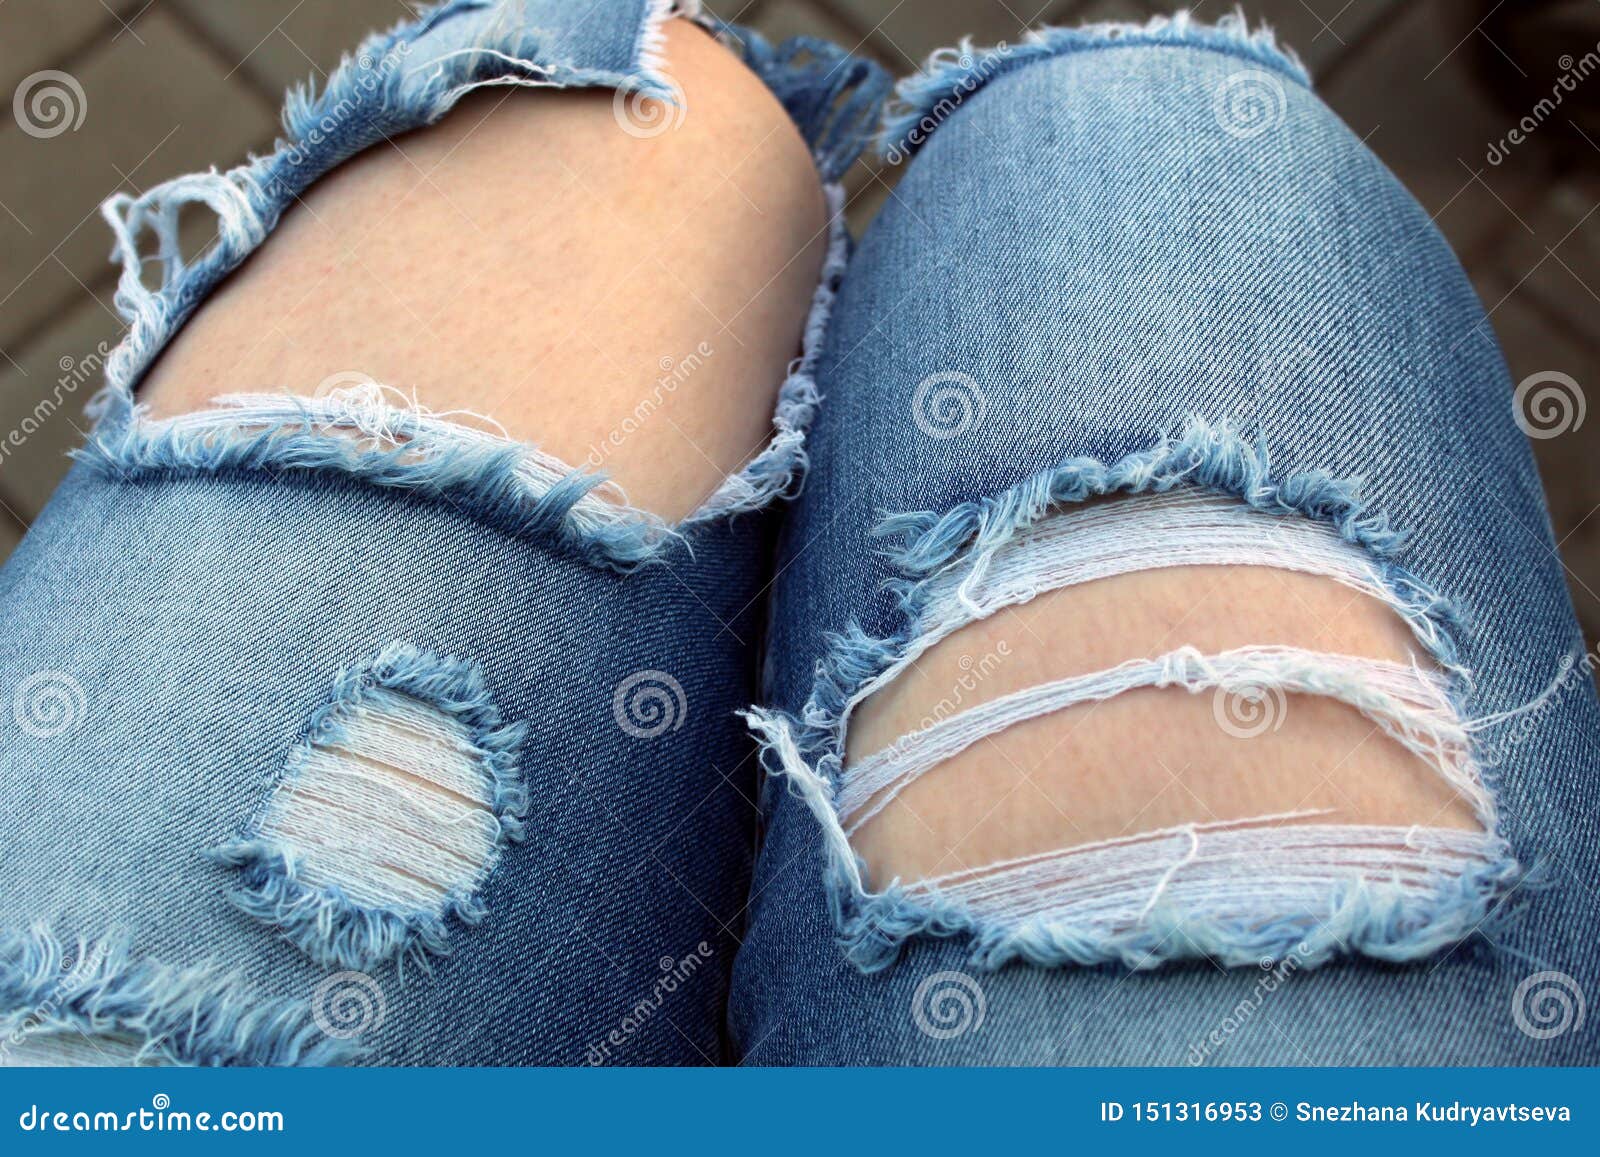 Striped Blue Jeans with Bent Legs Background Stock Image - Image of ...